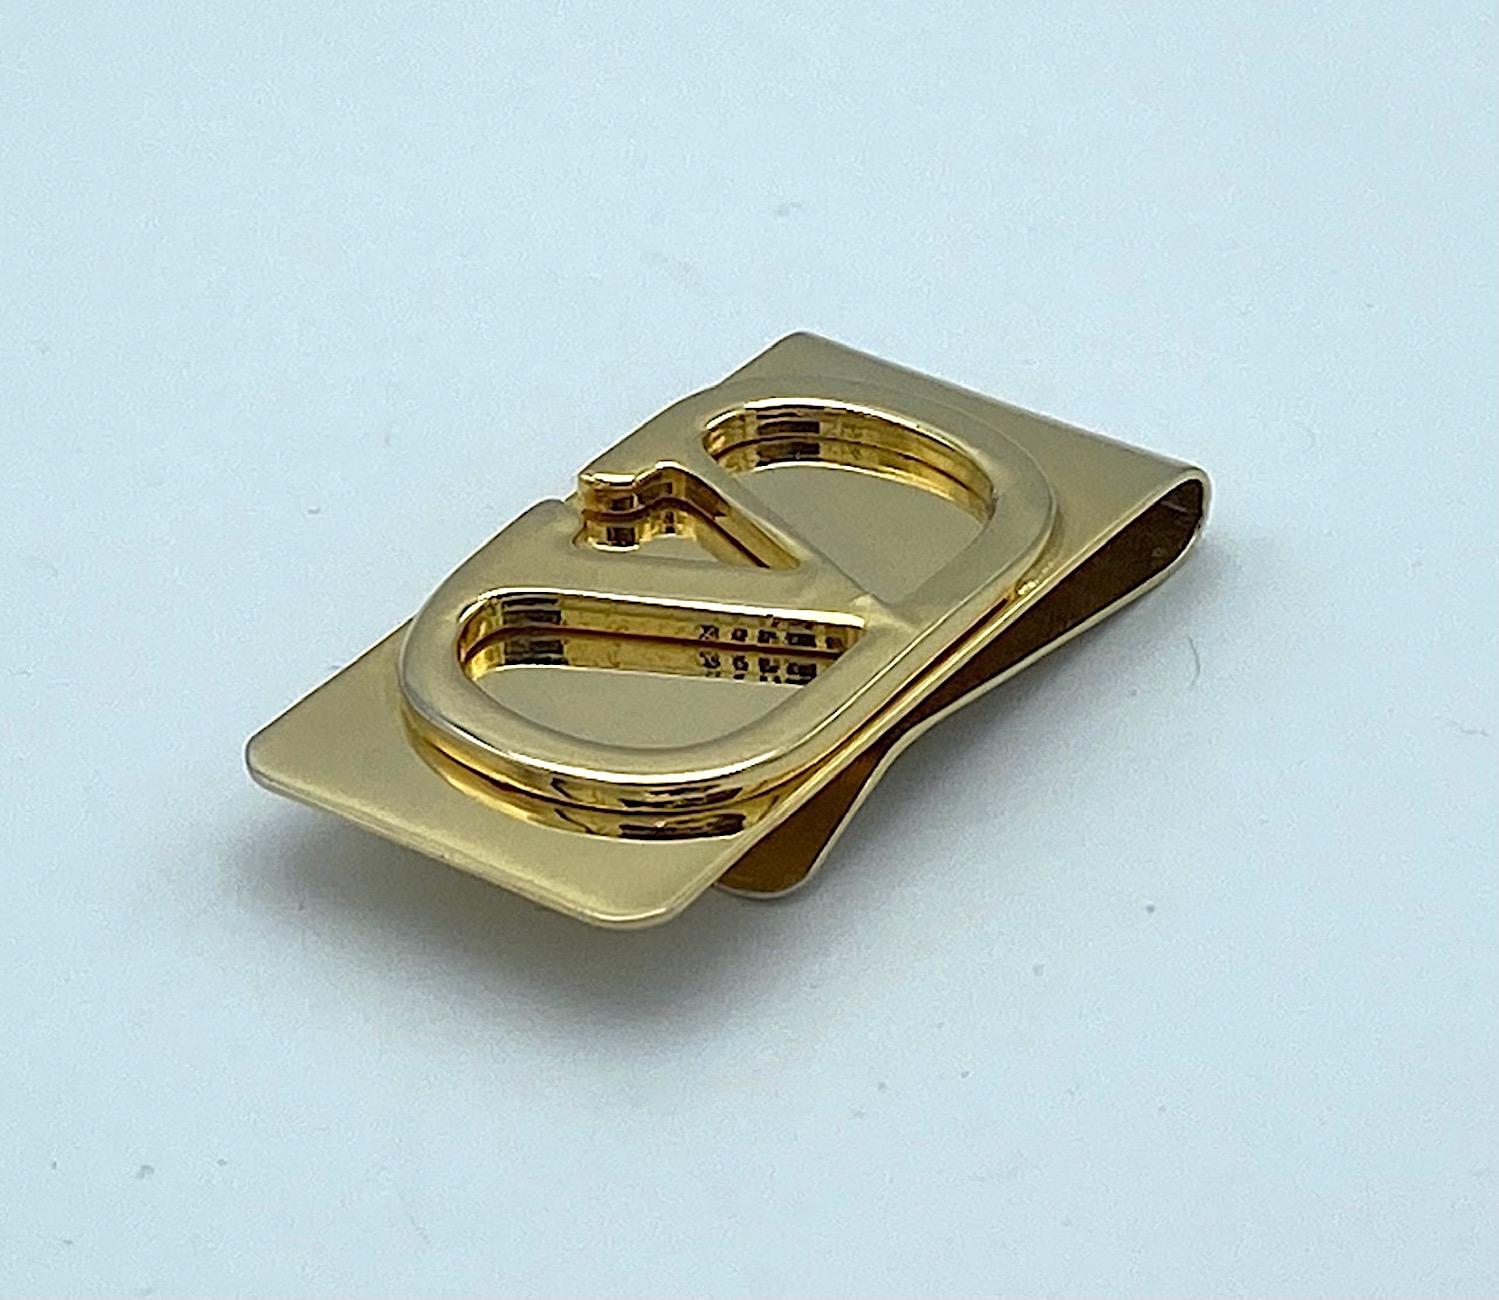 A 1980s gold plate money clip from house of Valentino in Italy. It is 1 inch wide and 2 inches long with a large Valentino logo of a 